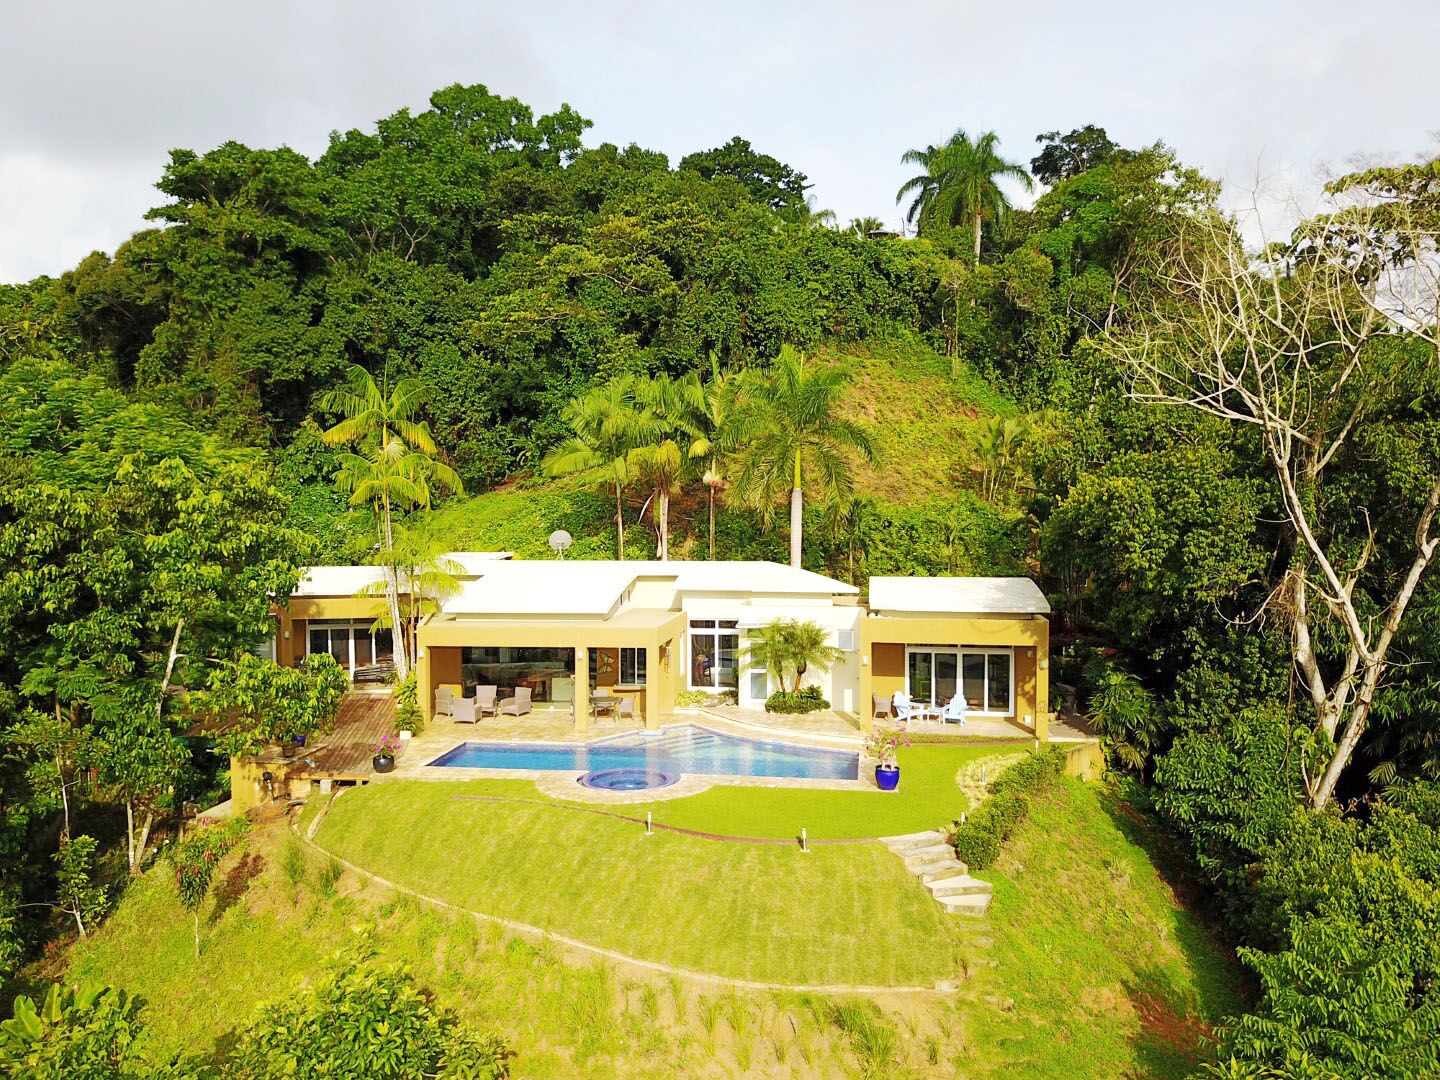 4 85 Acres 2 Bedroom Modern Tropical Home With Pool And